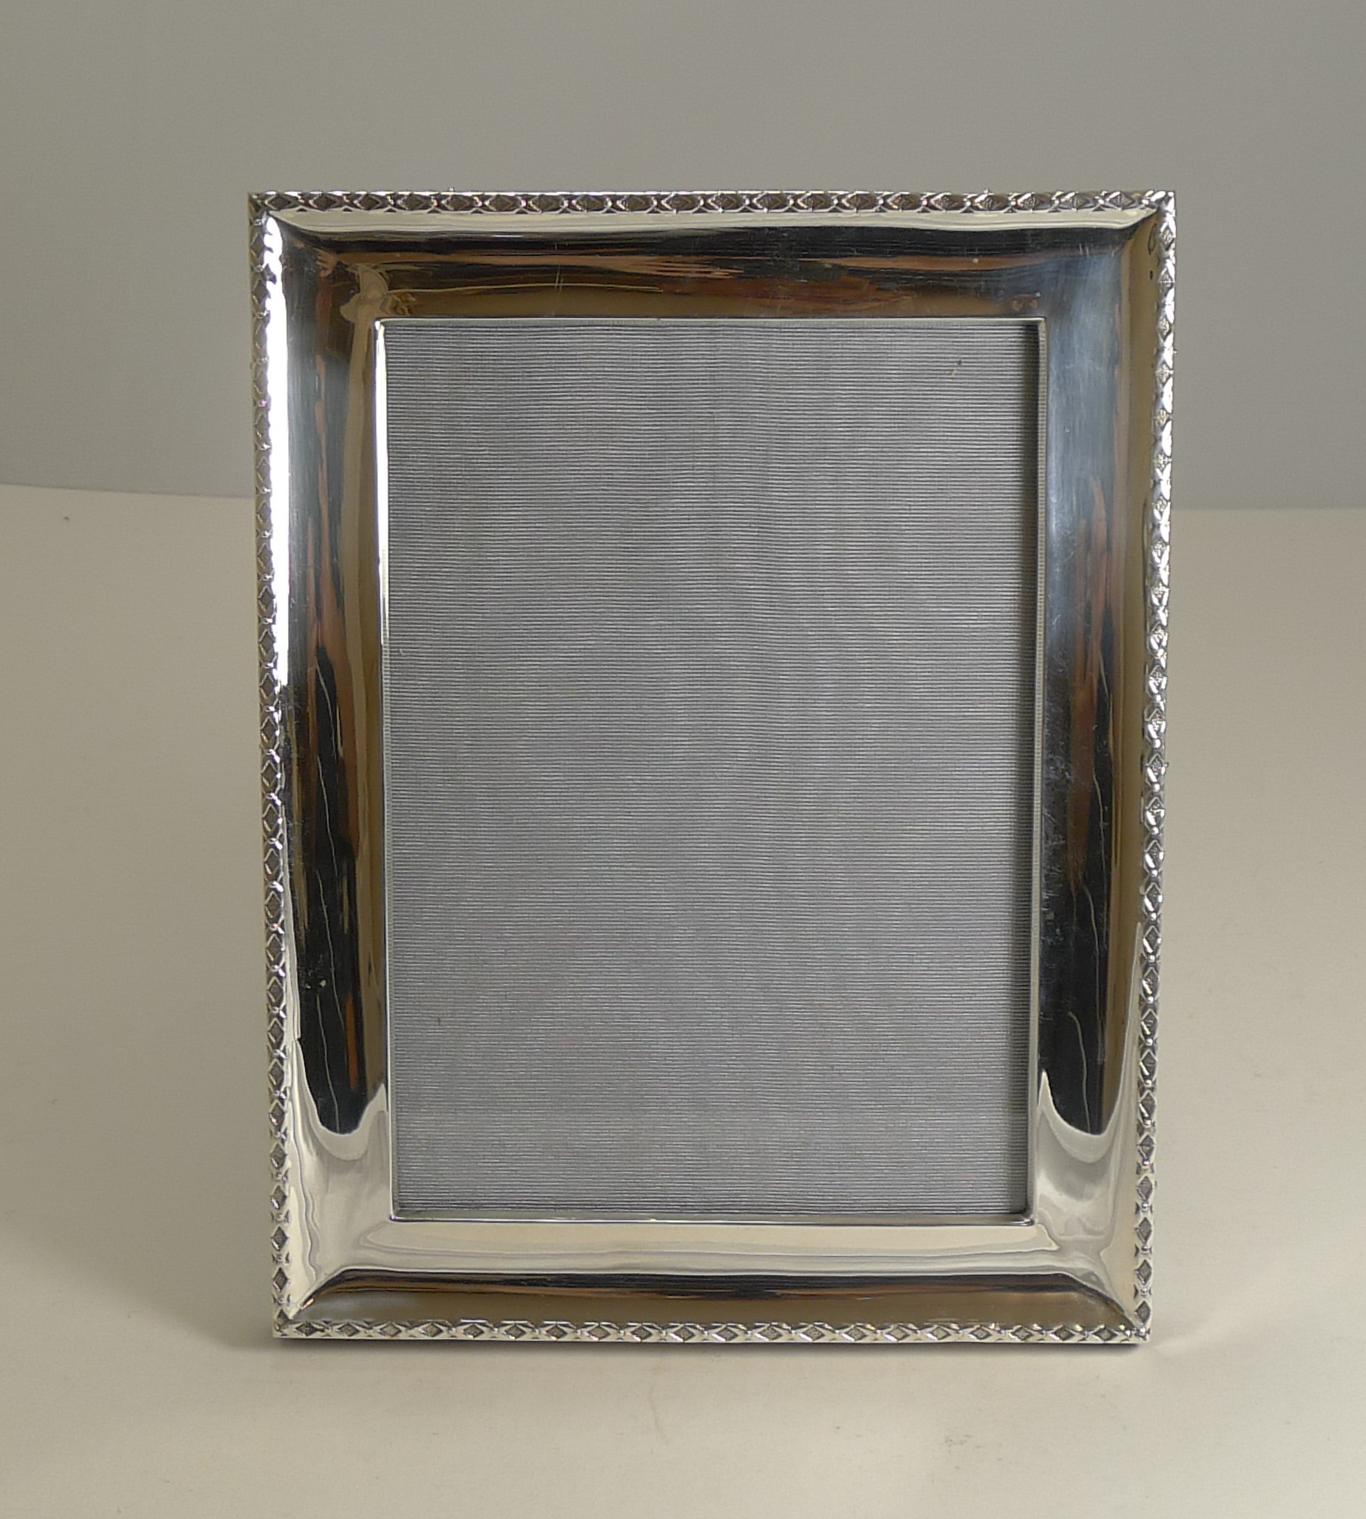 A handsome and stylish Edwardian photograph frame hallmarked for Birmingham 1909, a true antique example.

The back is made from solid English oak with a folding easel stand allowing the photograph to sit either upright or in a landscape